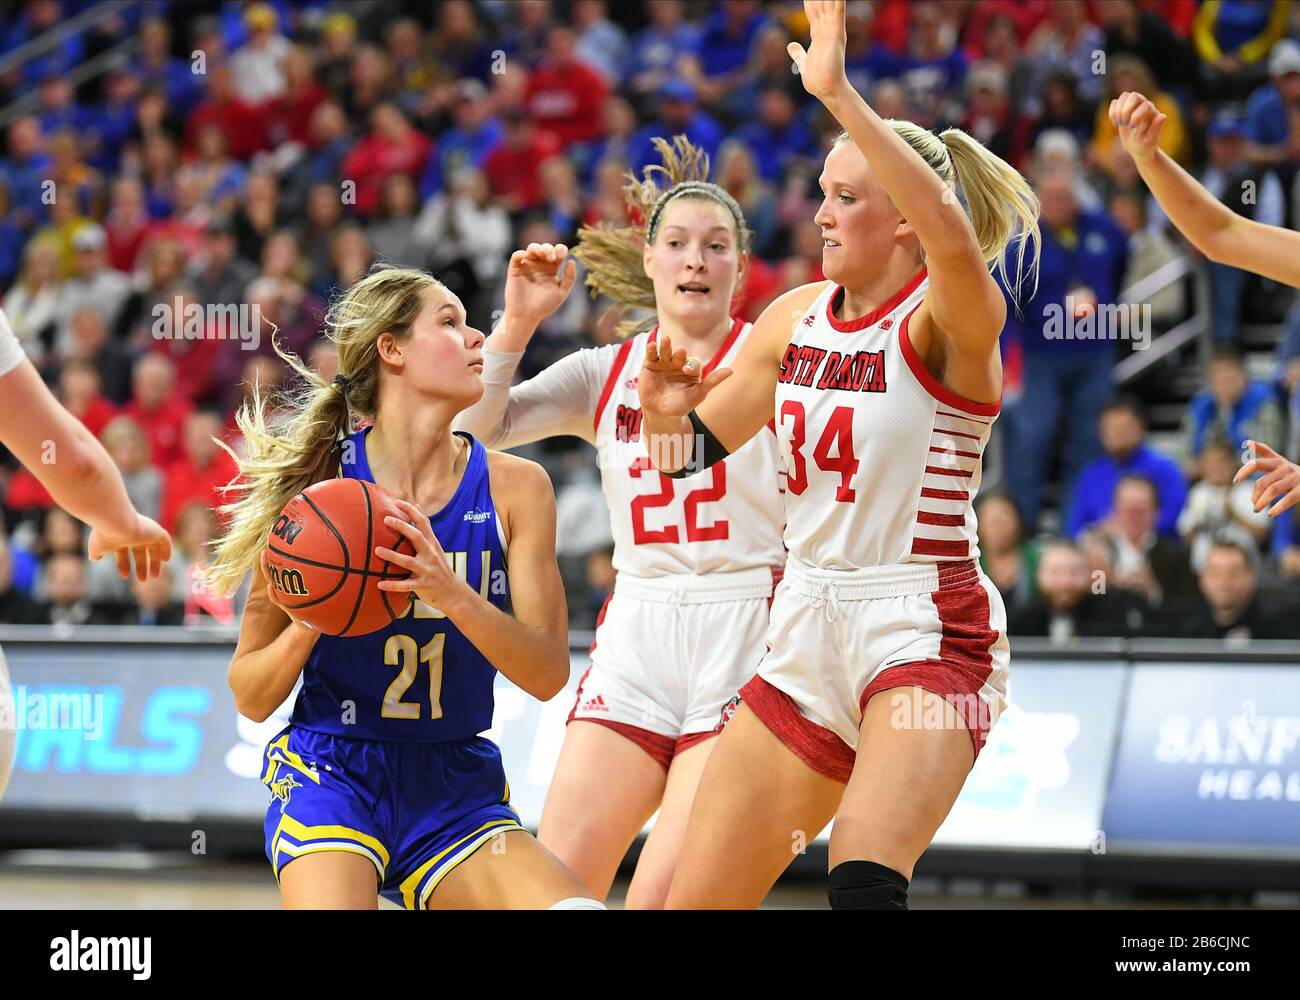 March 10, 2020: South Dakota Coyotes center Hannah Sjerven (34) guards South Dakota State Jackrabbits guard Tylee Irwin (21) during the Summit League women's championship basketball game between the South Dakota State Jackrabbits and the South Dakota Coyotes at the Denny Sanford Premier Center, Sioux Falls, SD. South Dakota defeated South Dakota State 63-58 and move on to the NCAA tournament. Photo by Russell Hons/CSM Stock Photo